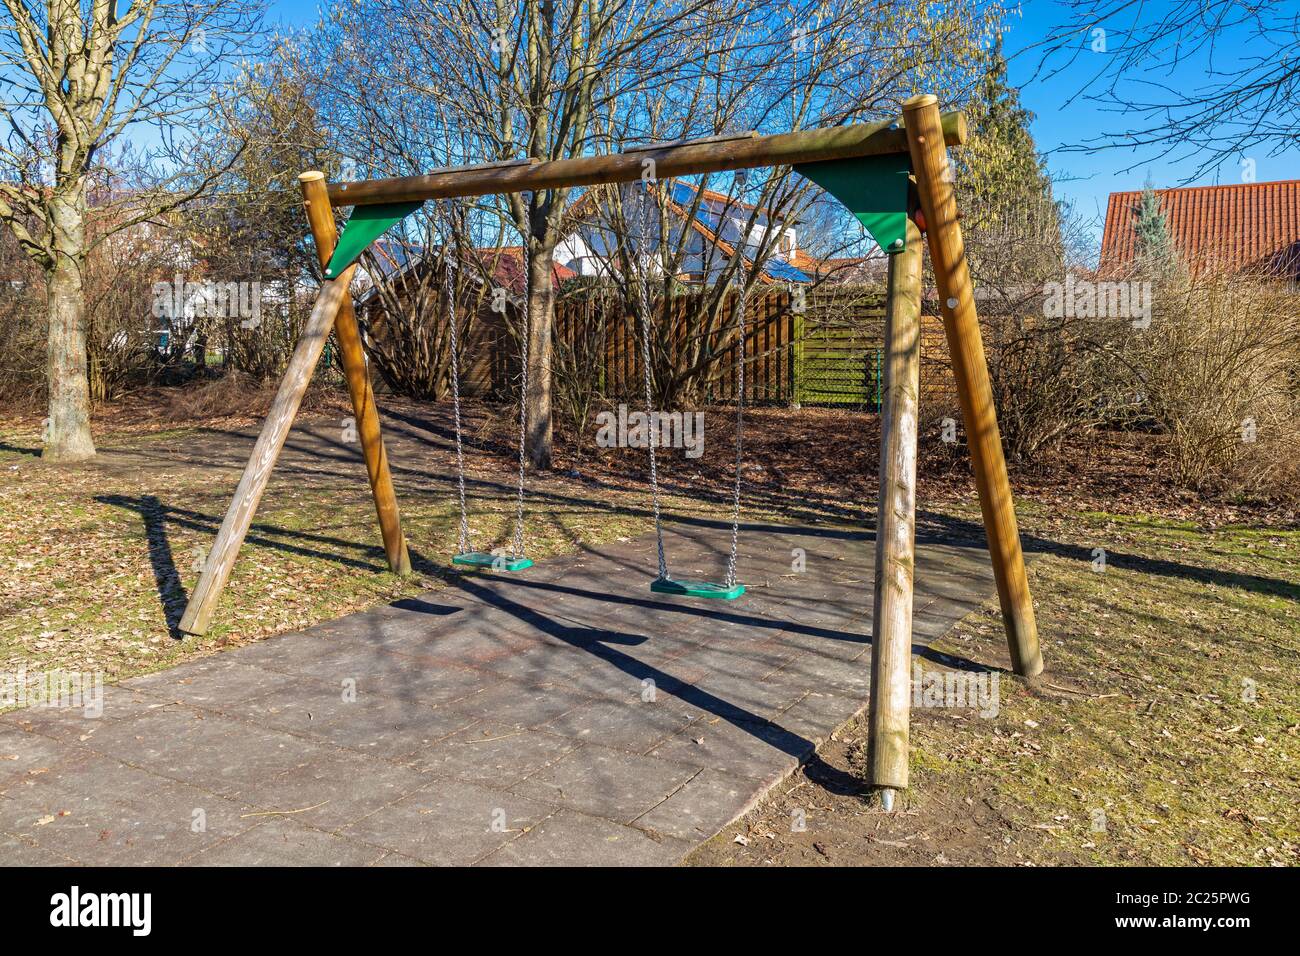 Swing on a deserted playground in late autumn Stock Photo